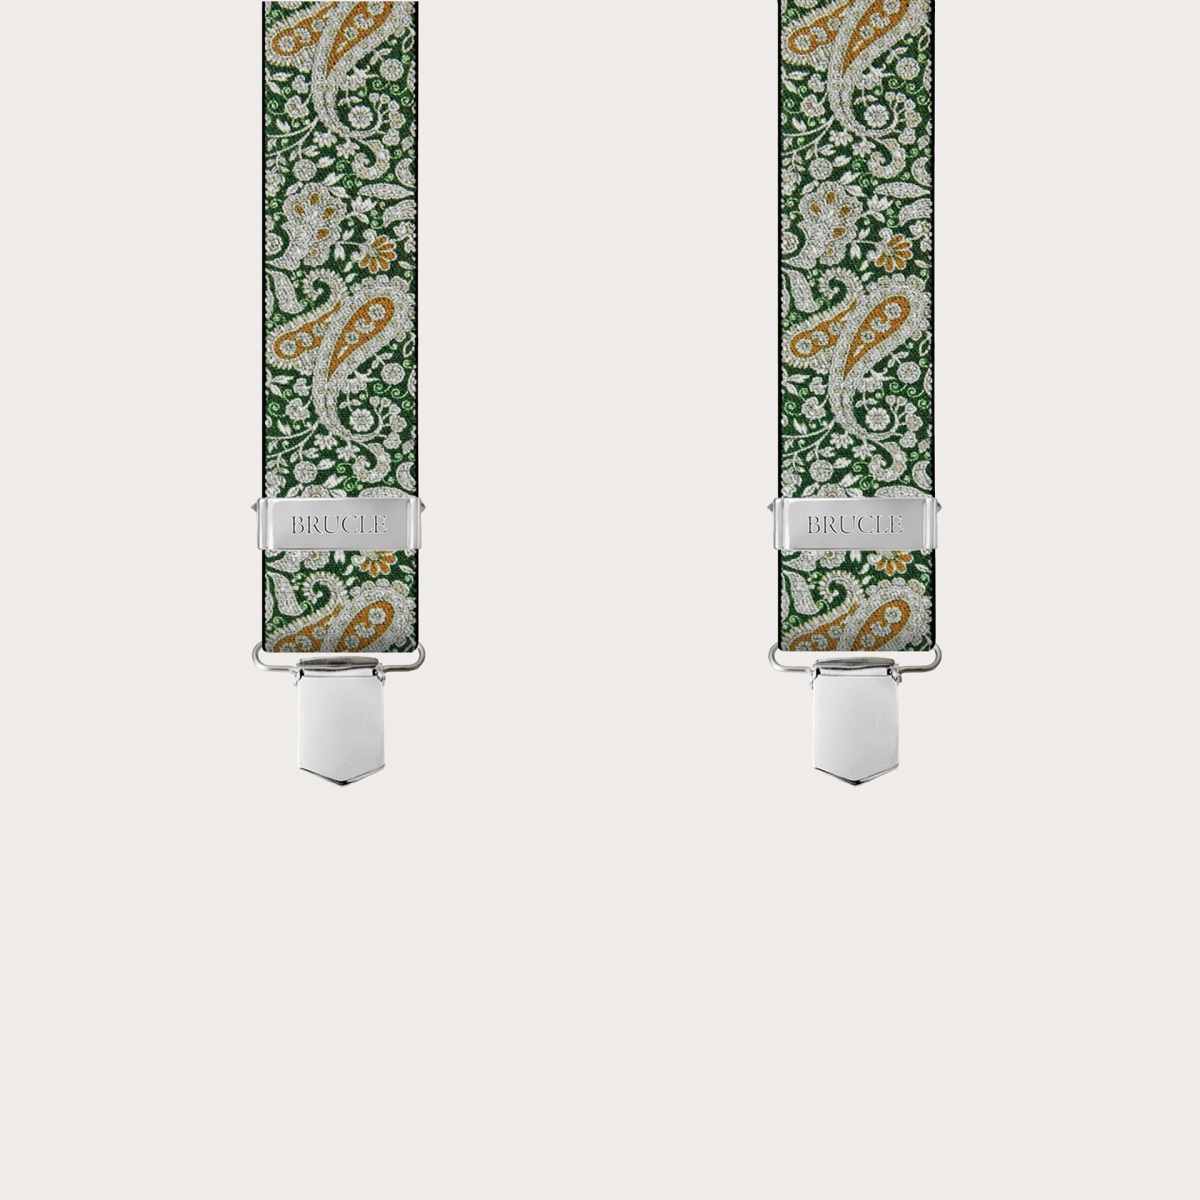 BRUCLE Suspenders with clips in green and gold cashmere pattern